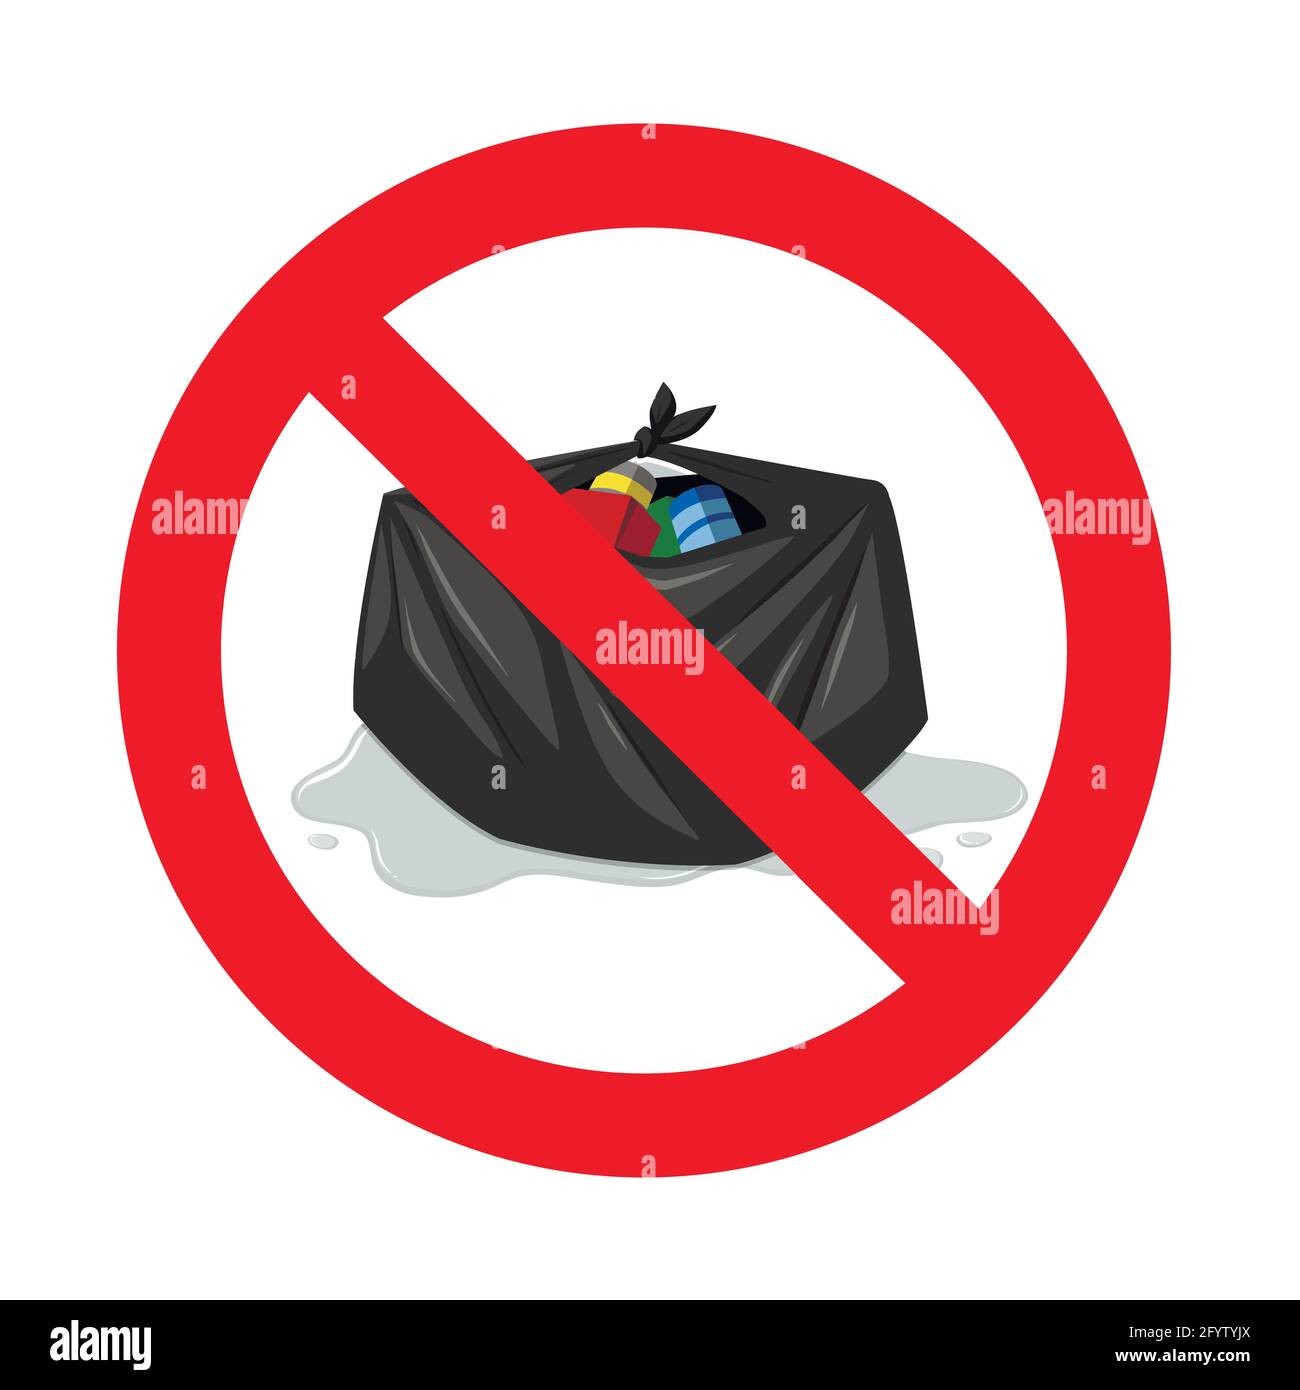 Do not litter icon sign. Vector no dumping, garbage throw banned rubbish, not dump trash, keep clean label illustration Stock Vector